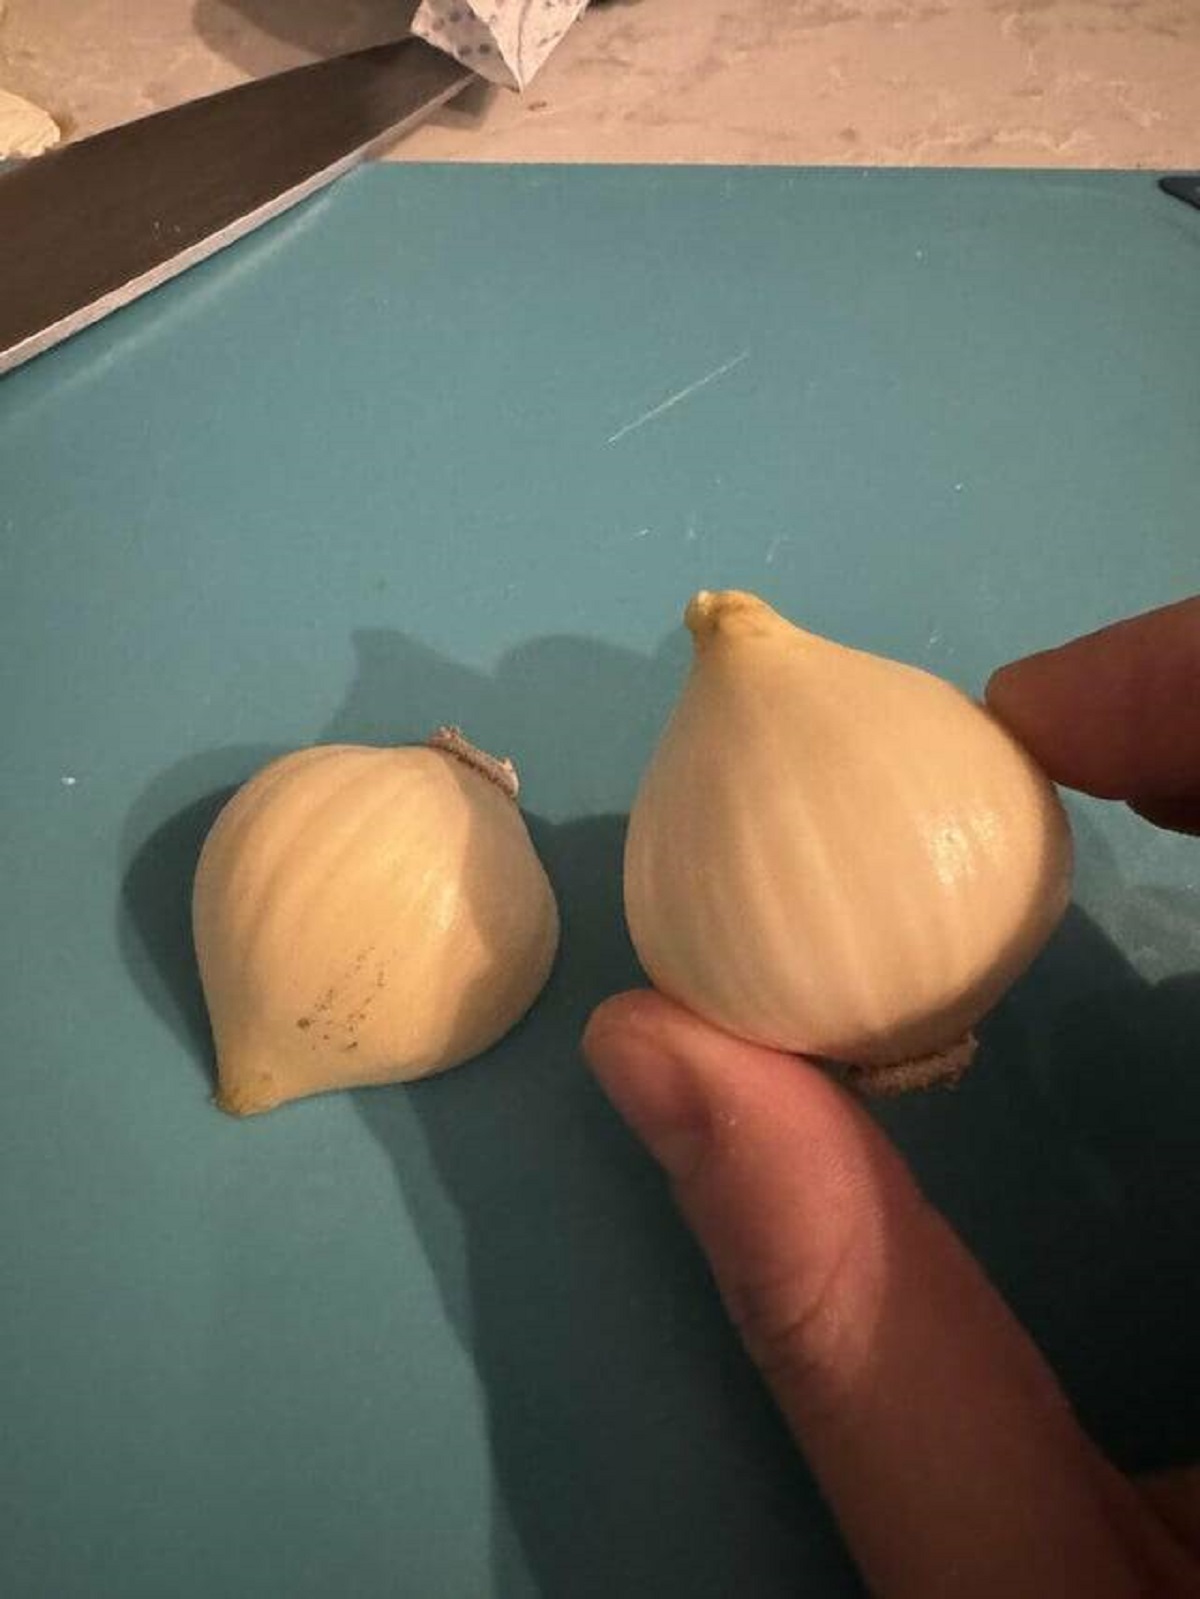 "My garlic is just one piece; there are no cloves."